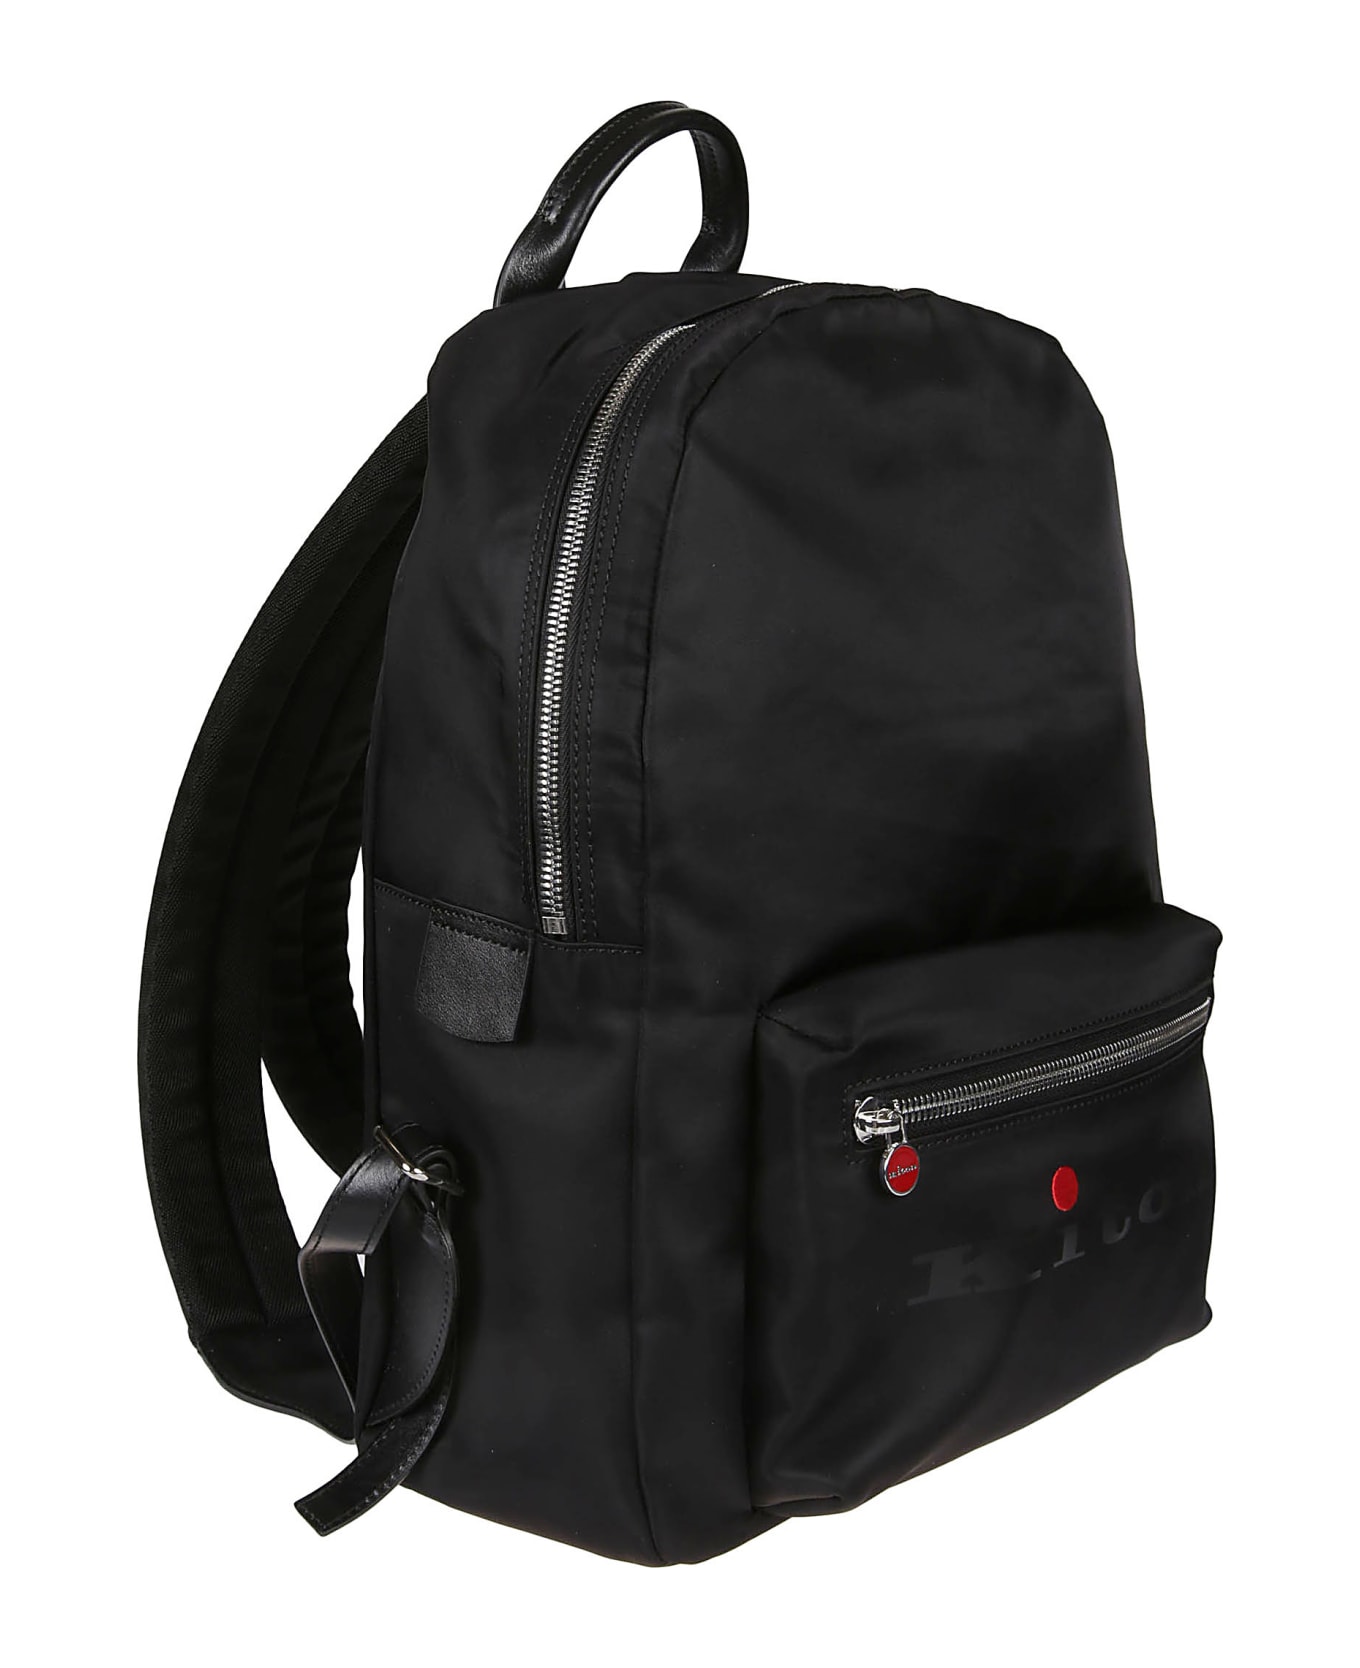 Kiton A0021 Backpack - Nero バックパック